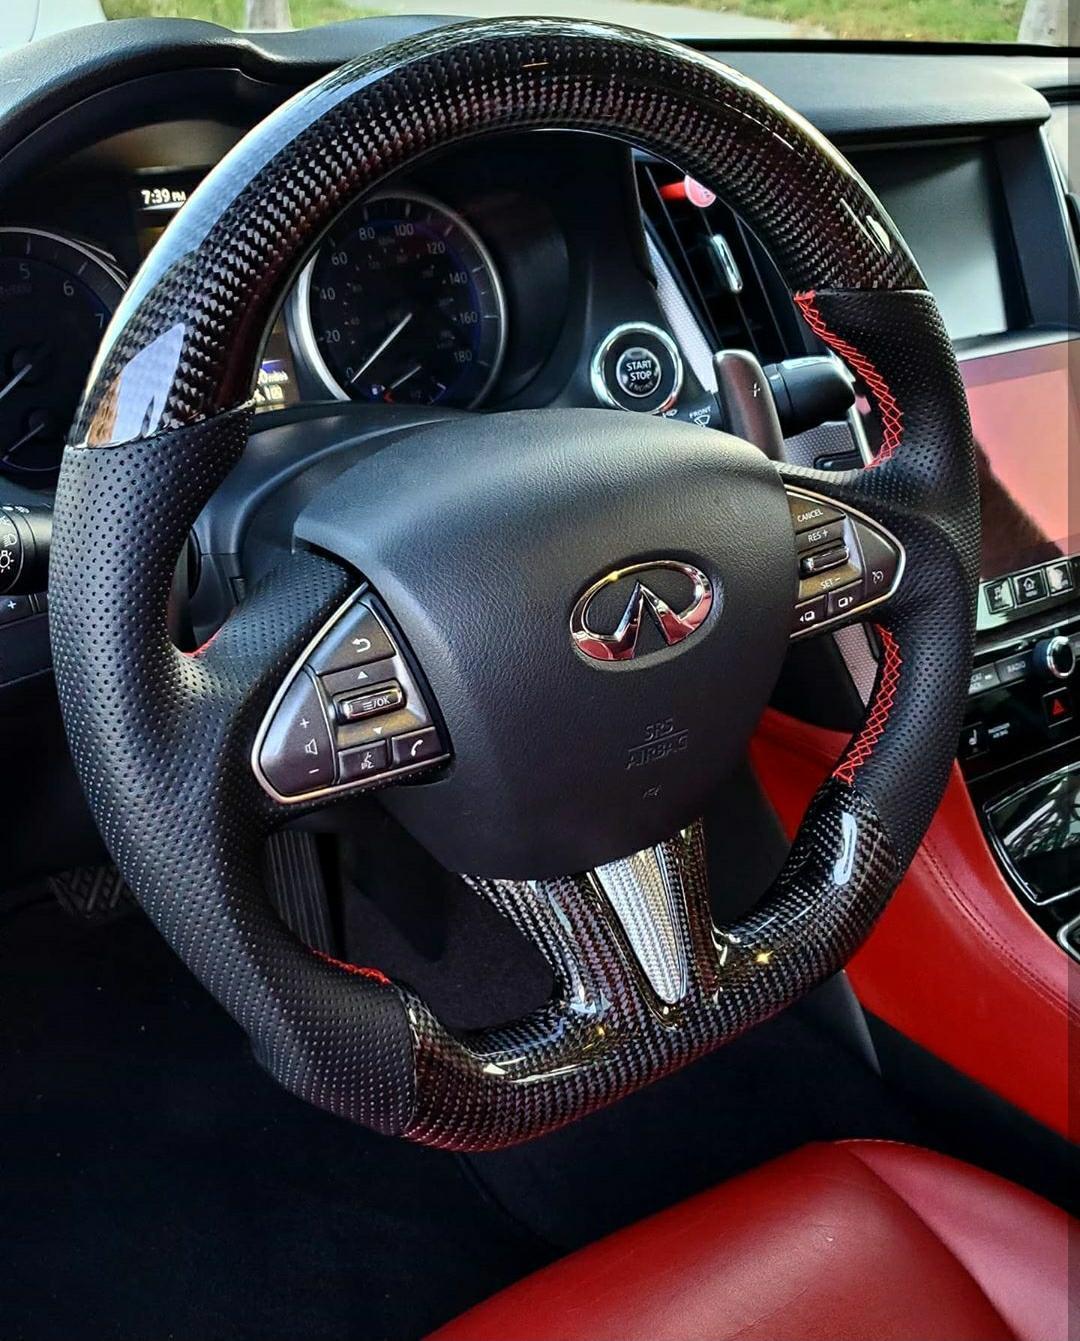 Classic CarbonFiber Steering Wheel design with leather grips, red stitching, and a standard airbag cover for Infiniti Q50 2014-2017.